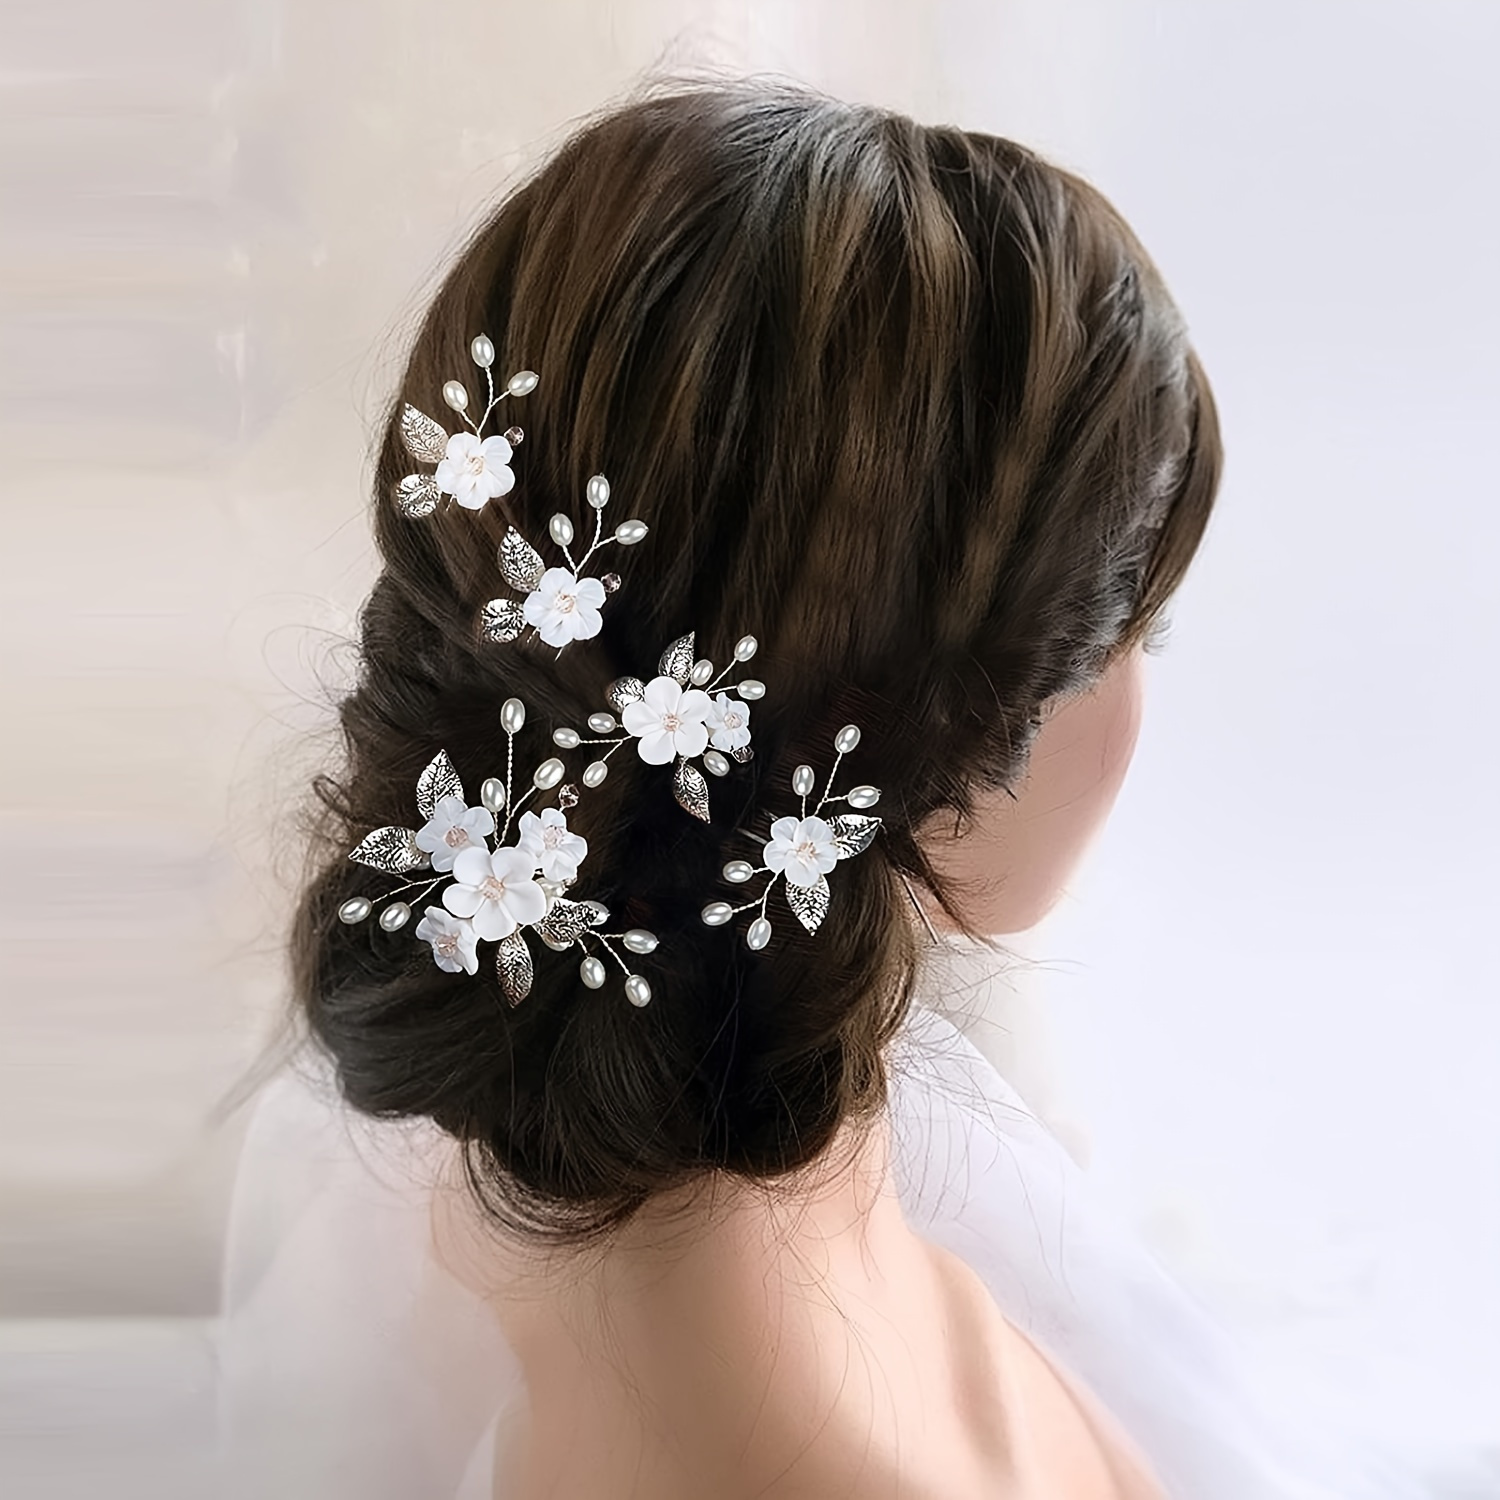 

5pcs White Flower Crystal Hair Pins Set For Wedding - Soft Pottery U-shaped Hair Accessories For Bridal Party